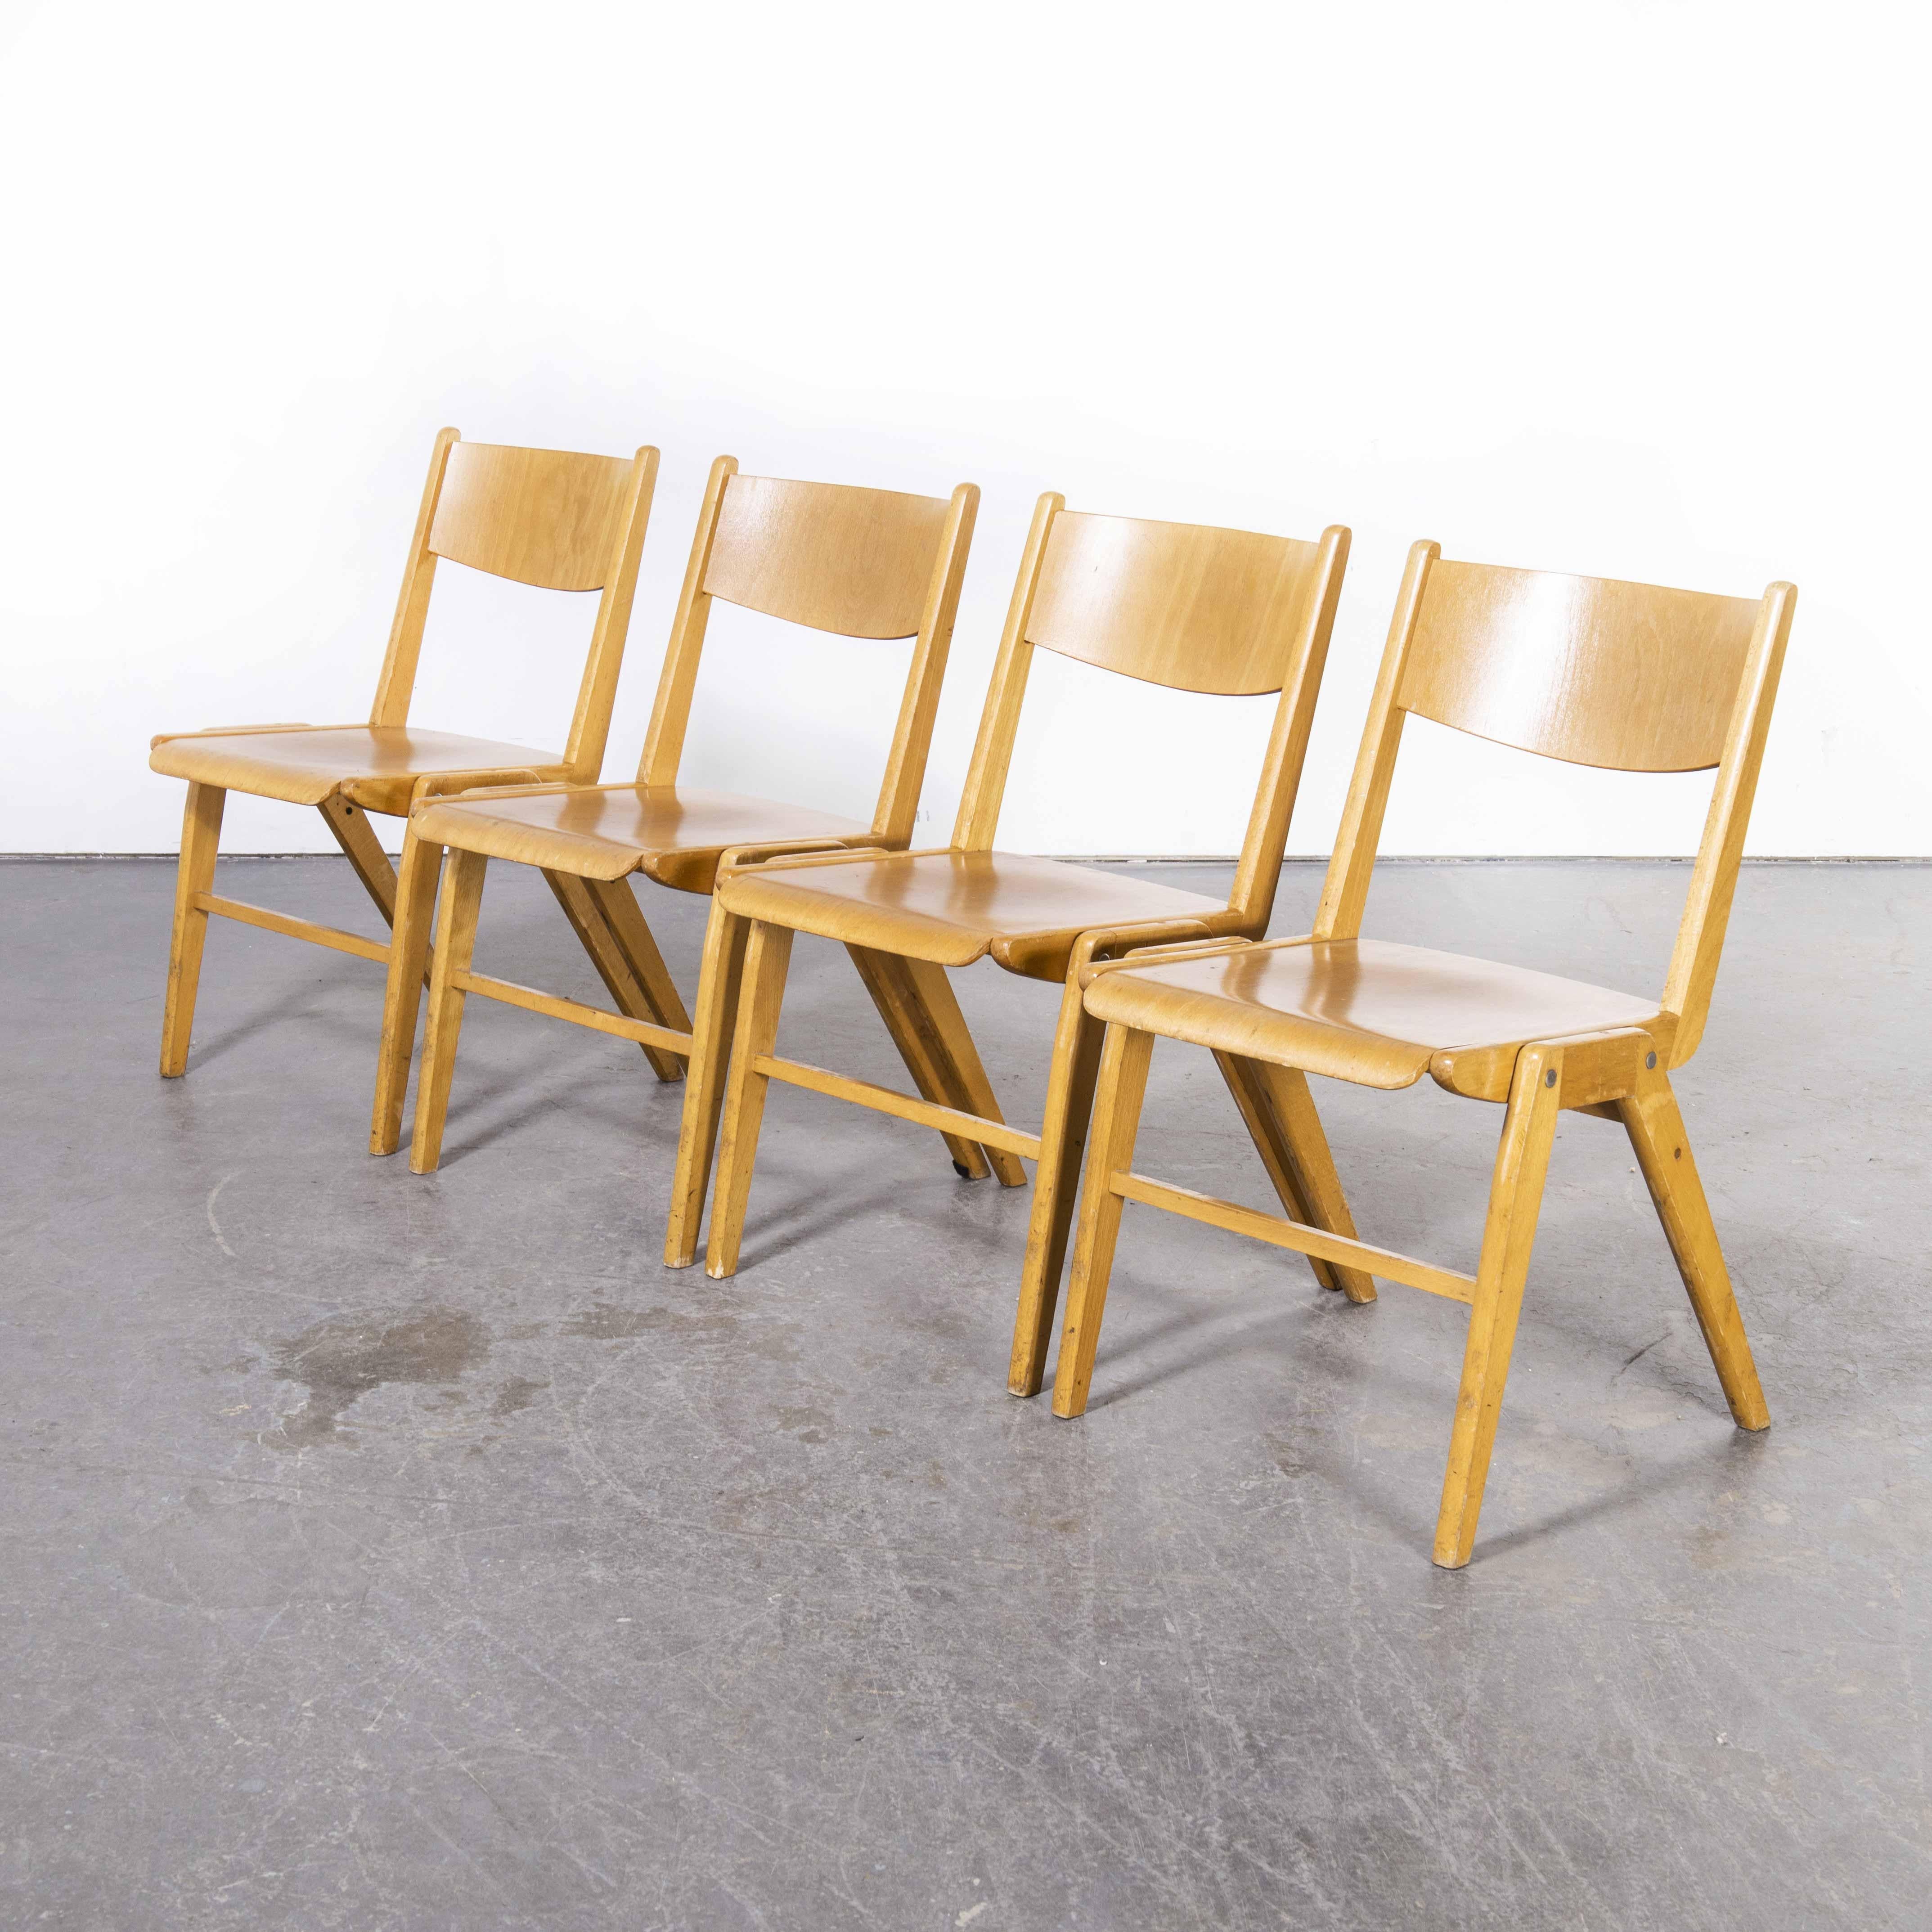 1970’s Original Casala stacking dining chair – set of four
1970’s Original Casala stacking dining chair – set of four. Casala is one of Germany’s best known furniture producers still producing to this day. This is one of their models in production